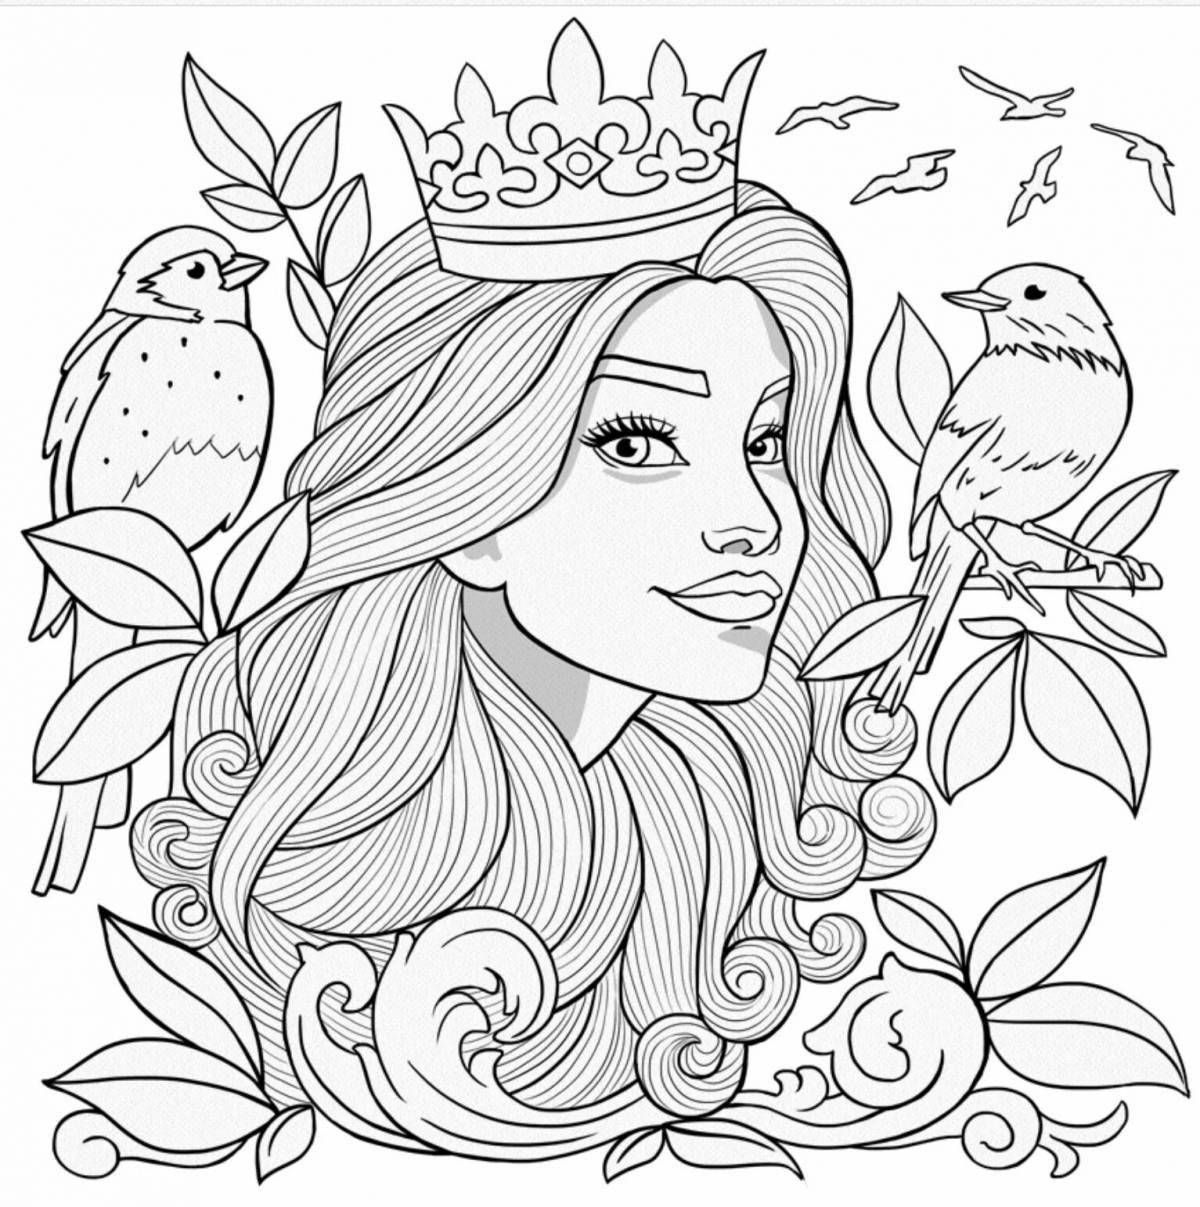 Dazzling coloring book for girls 10-12 years old